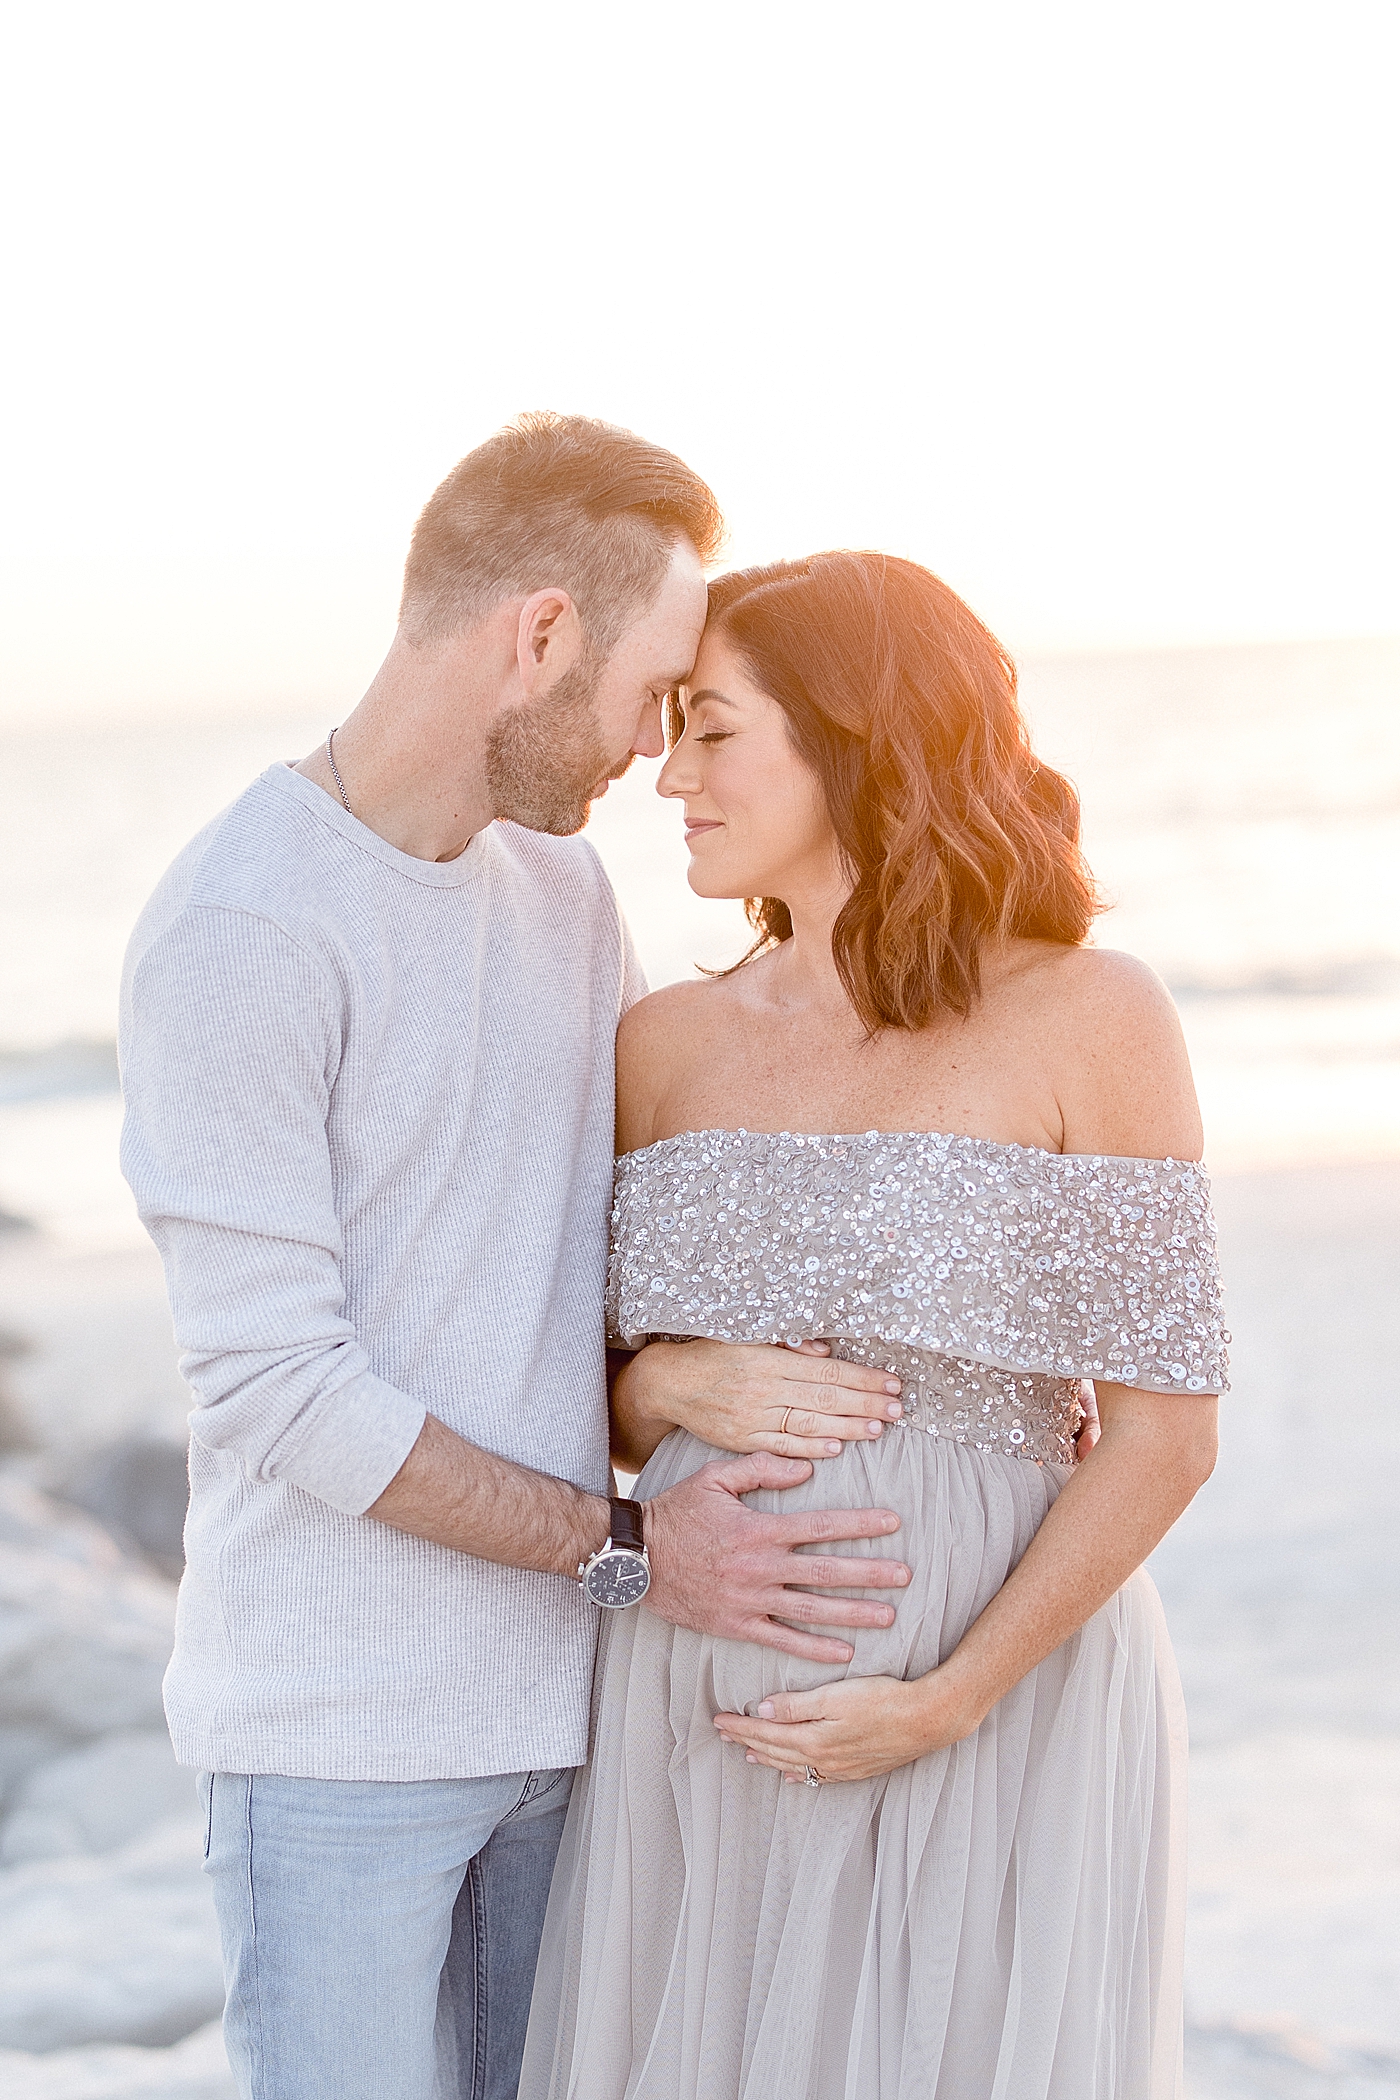 Expecting parents with heads together on the beach. Photo by Brittany Elise Photography.